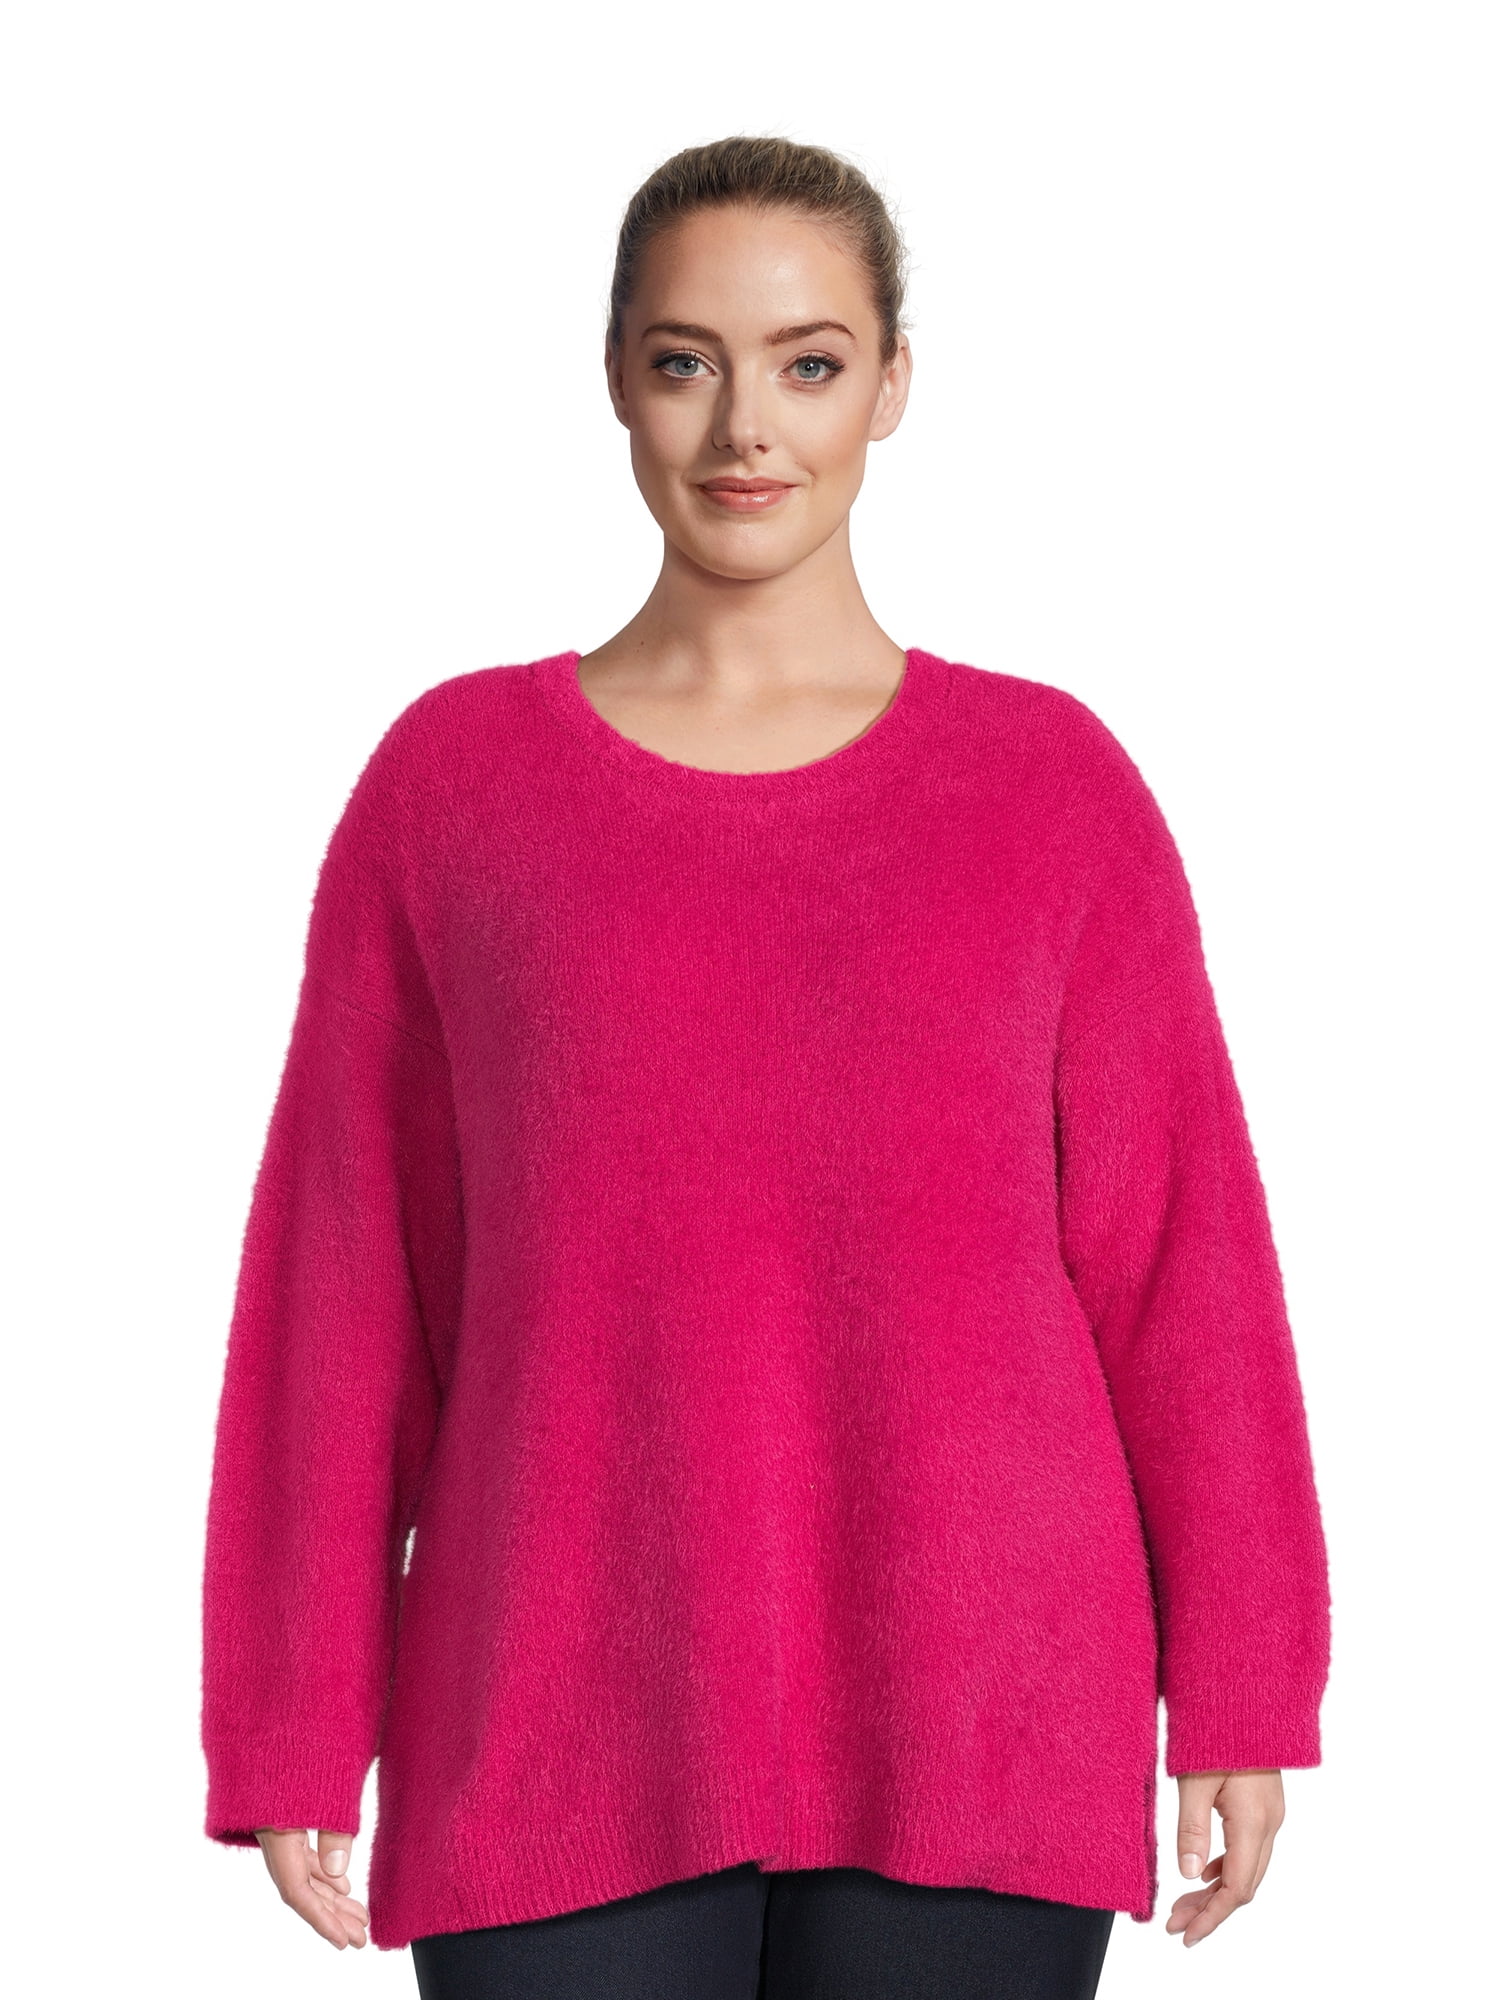 Terra And Sky Women S Plus Size Eyelash Knit Pullover Sweater Midweight